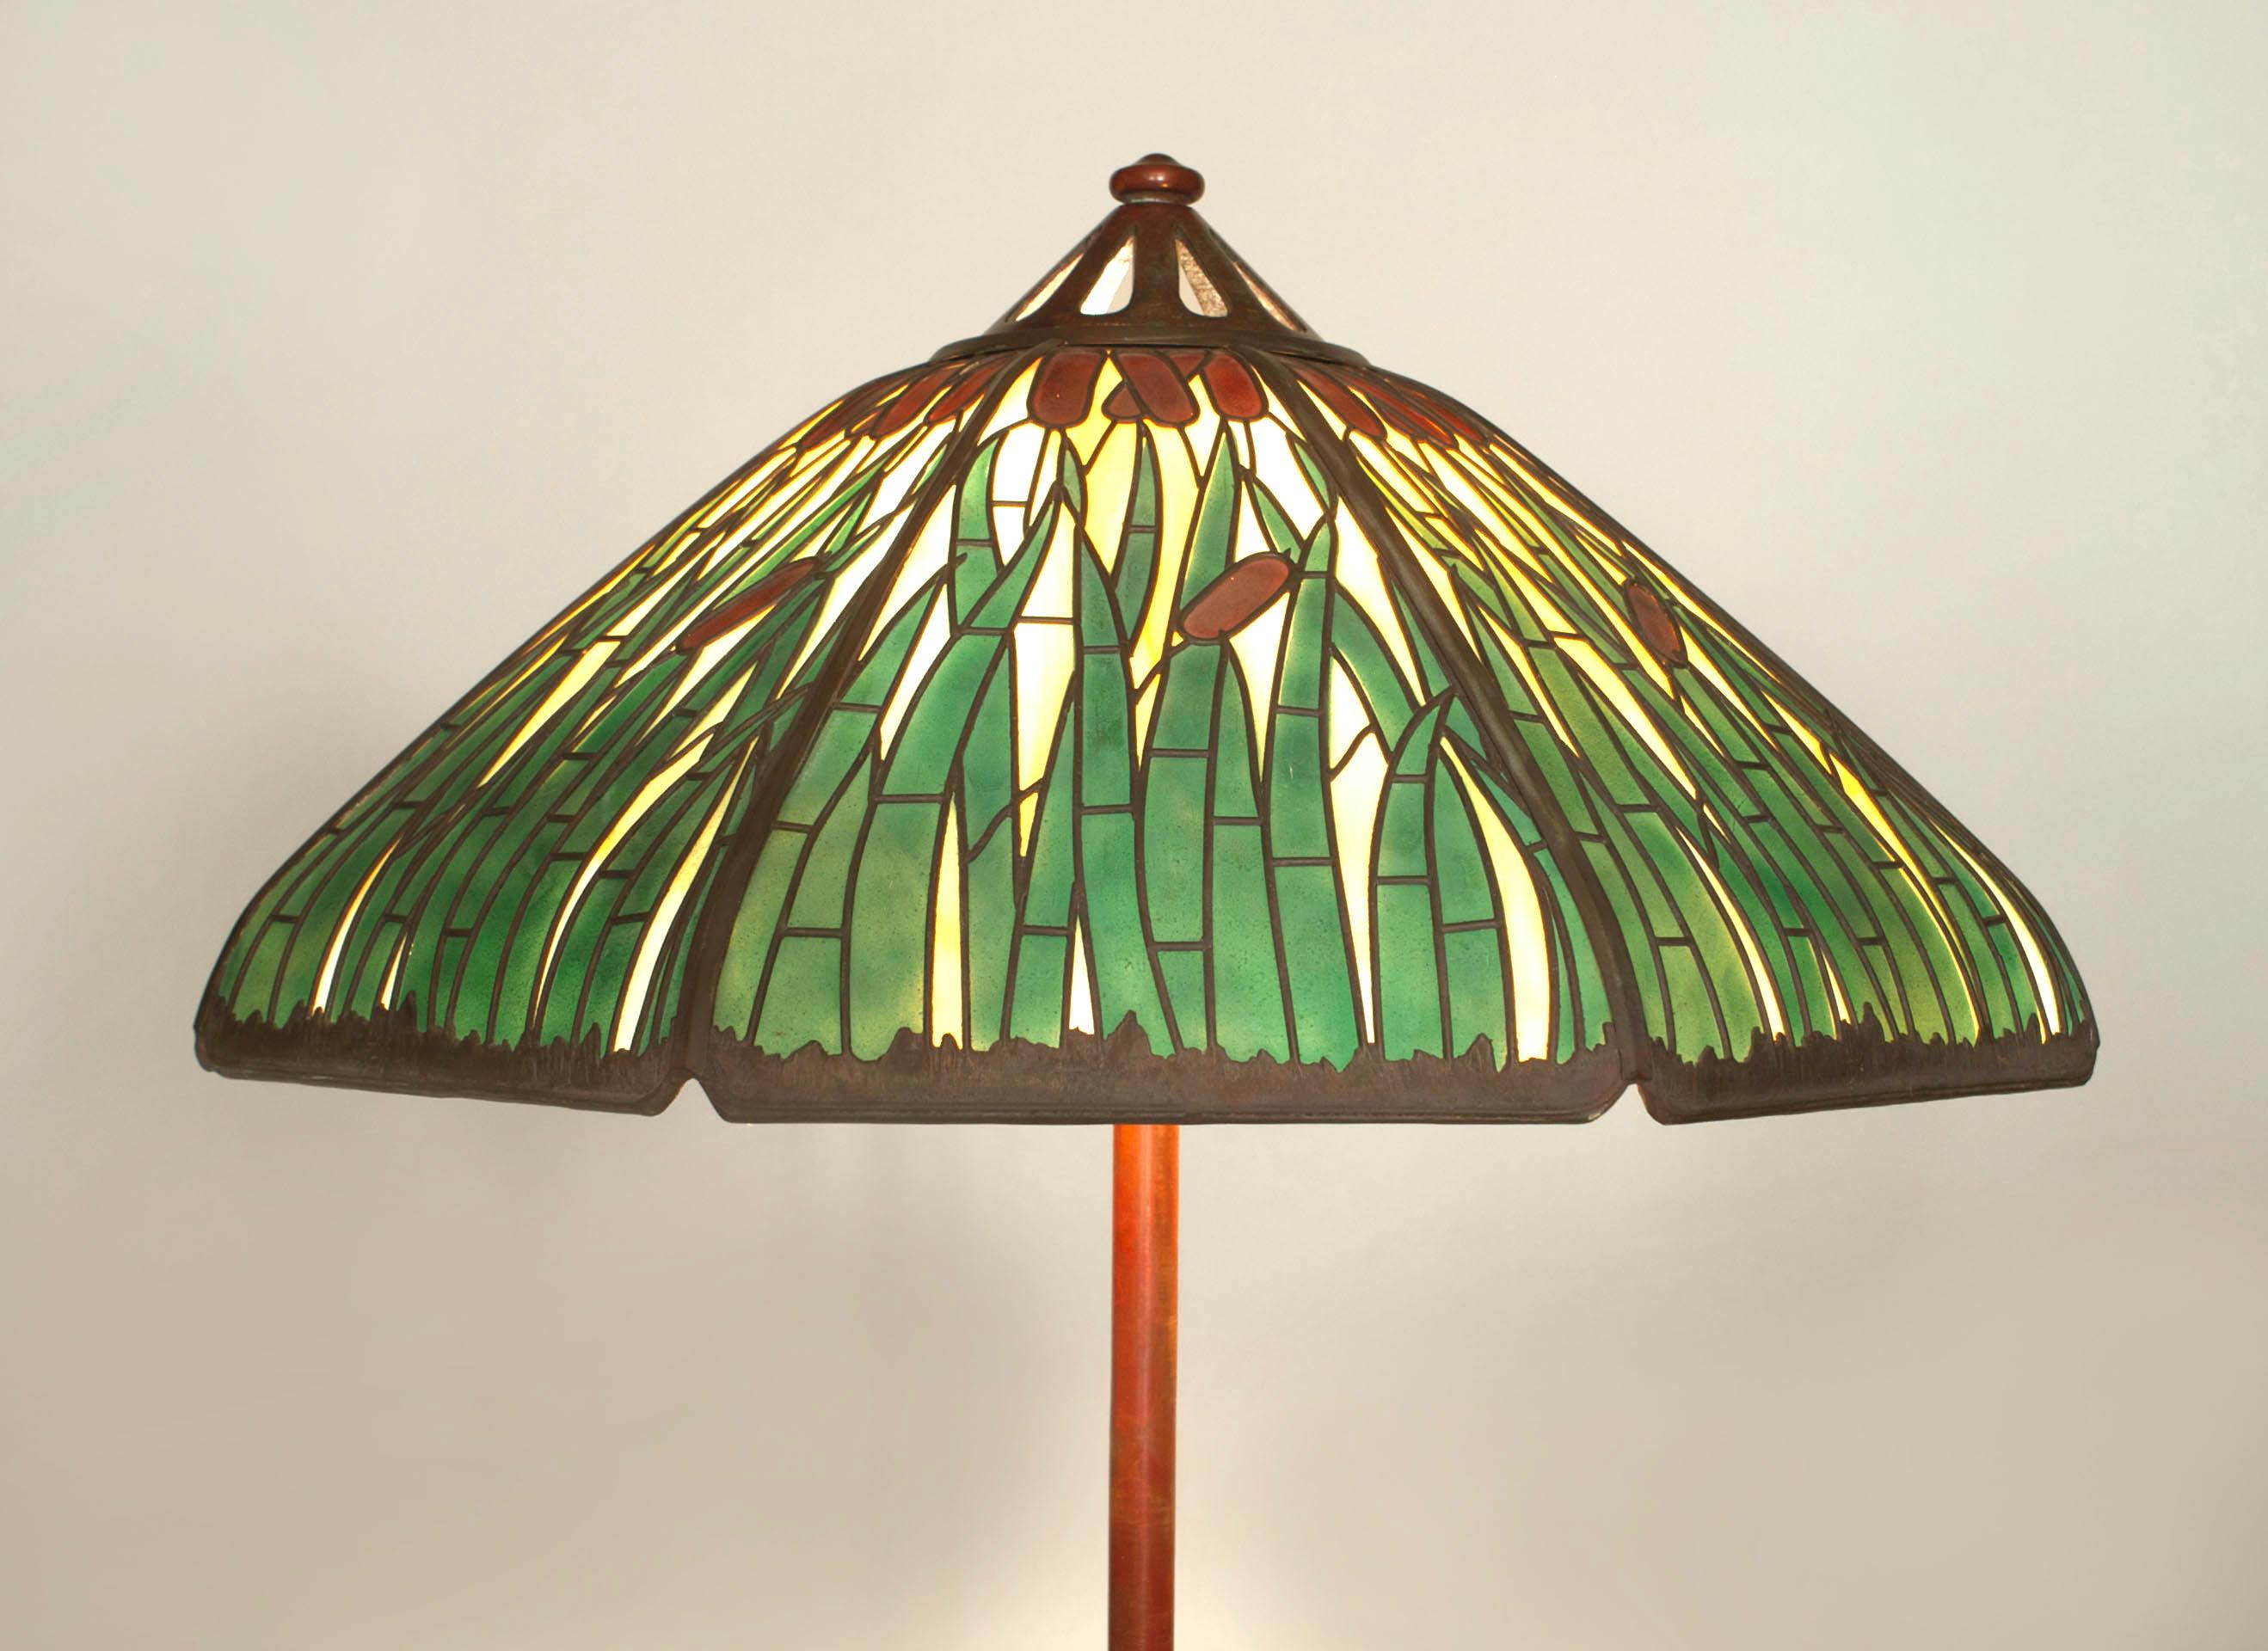 American Mission bronze adjustable floor lamp having 3 supports resting on a shaped base holding an 8 sided stained glass shade with cattail design. (signed: HANDEL)
